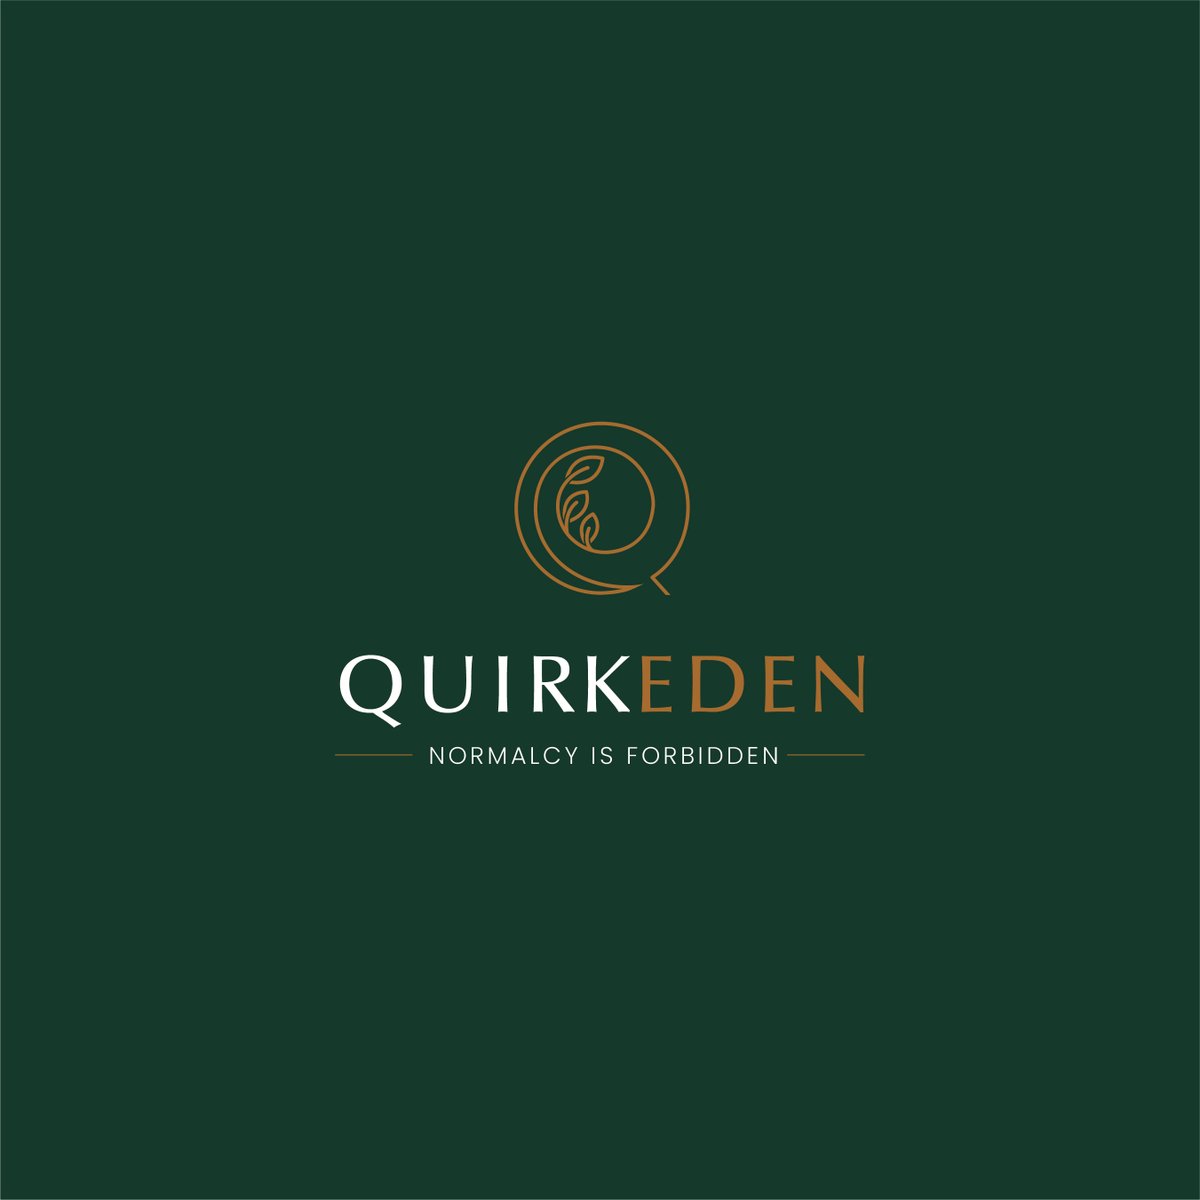 'Welcome to Quirkeden, the Garden of Creativity! 🌿 In a world where normalcy is forbidden, we are a Creative Agency that thrives on #BreakTheNorm and #UnleashYourImagination